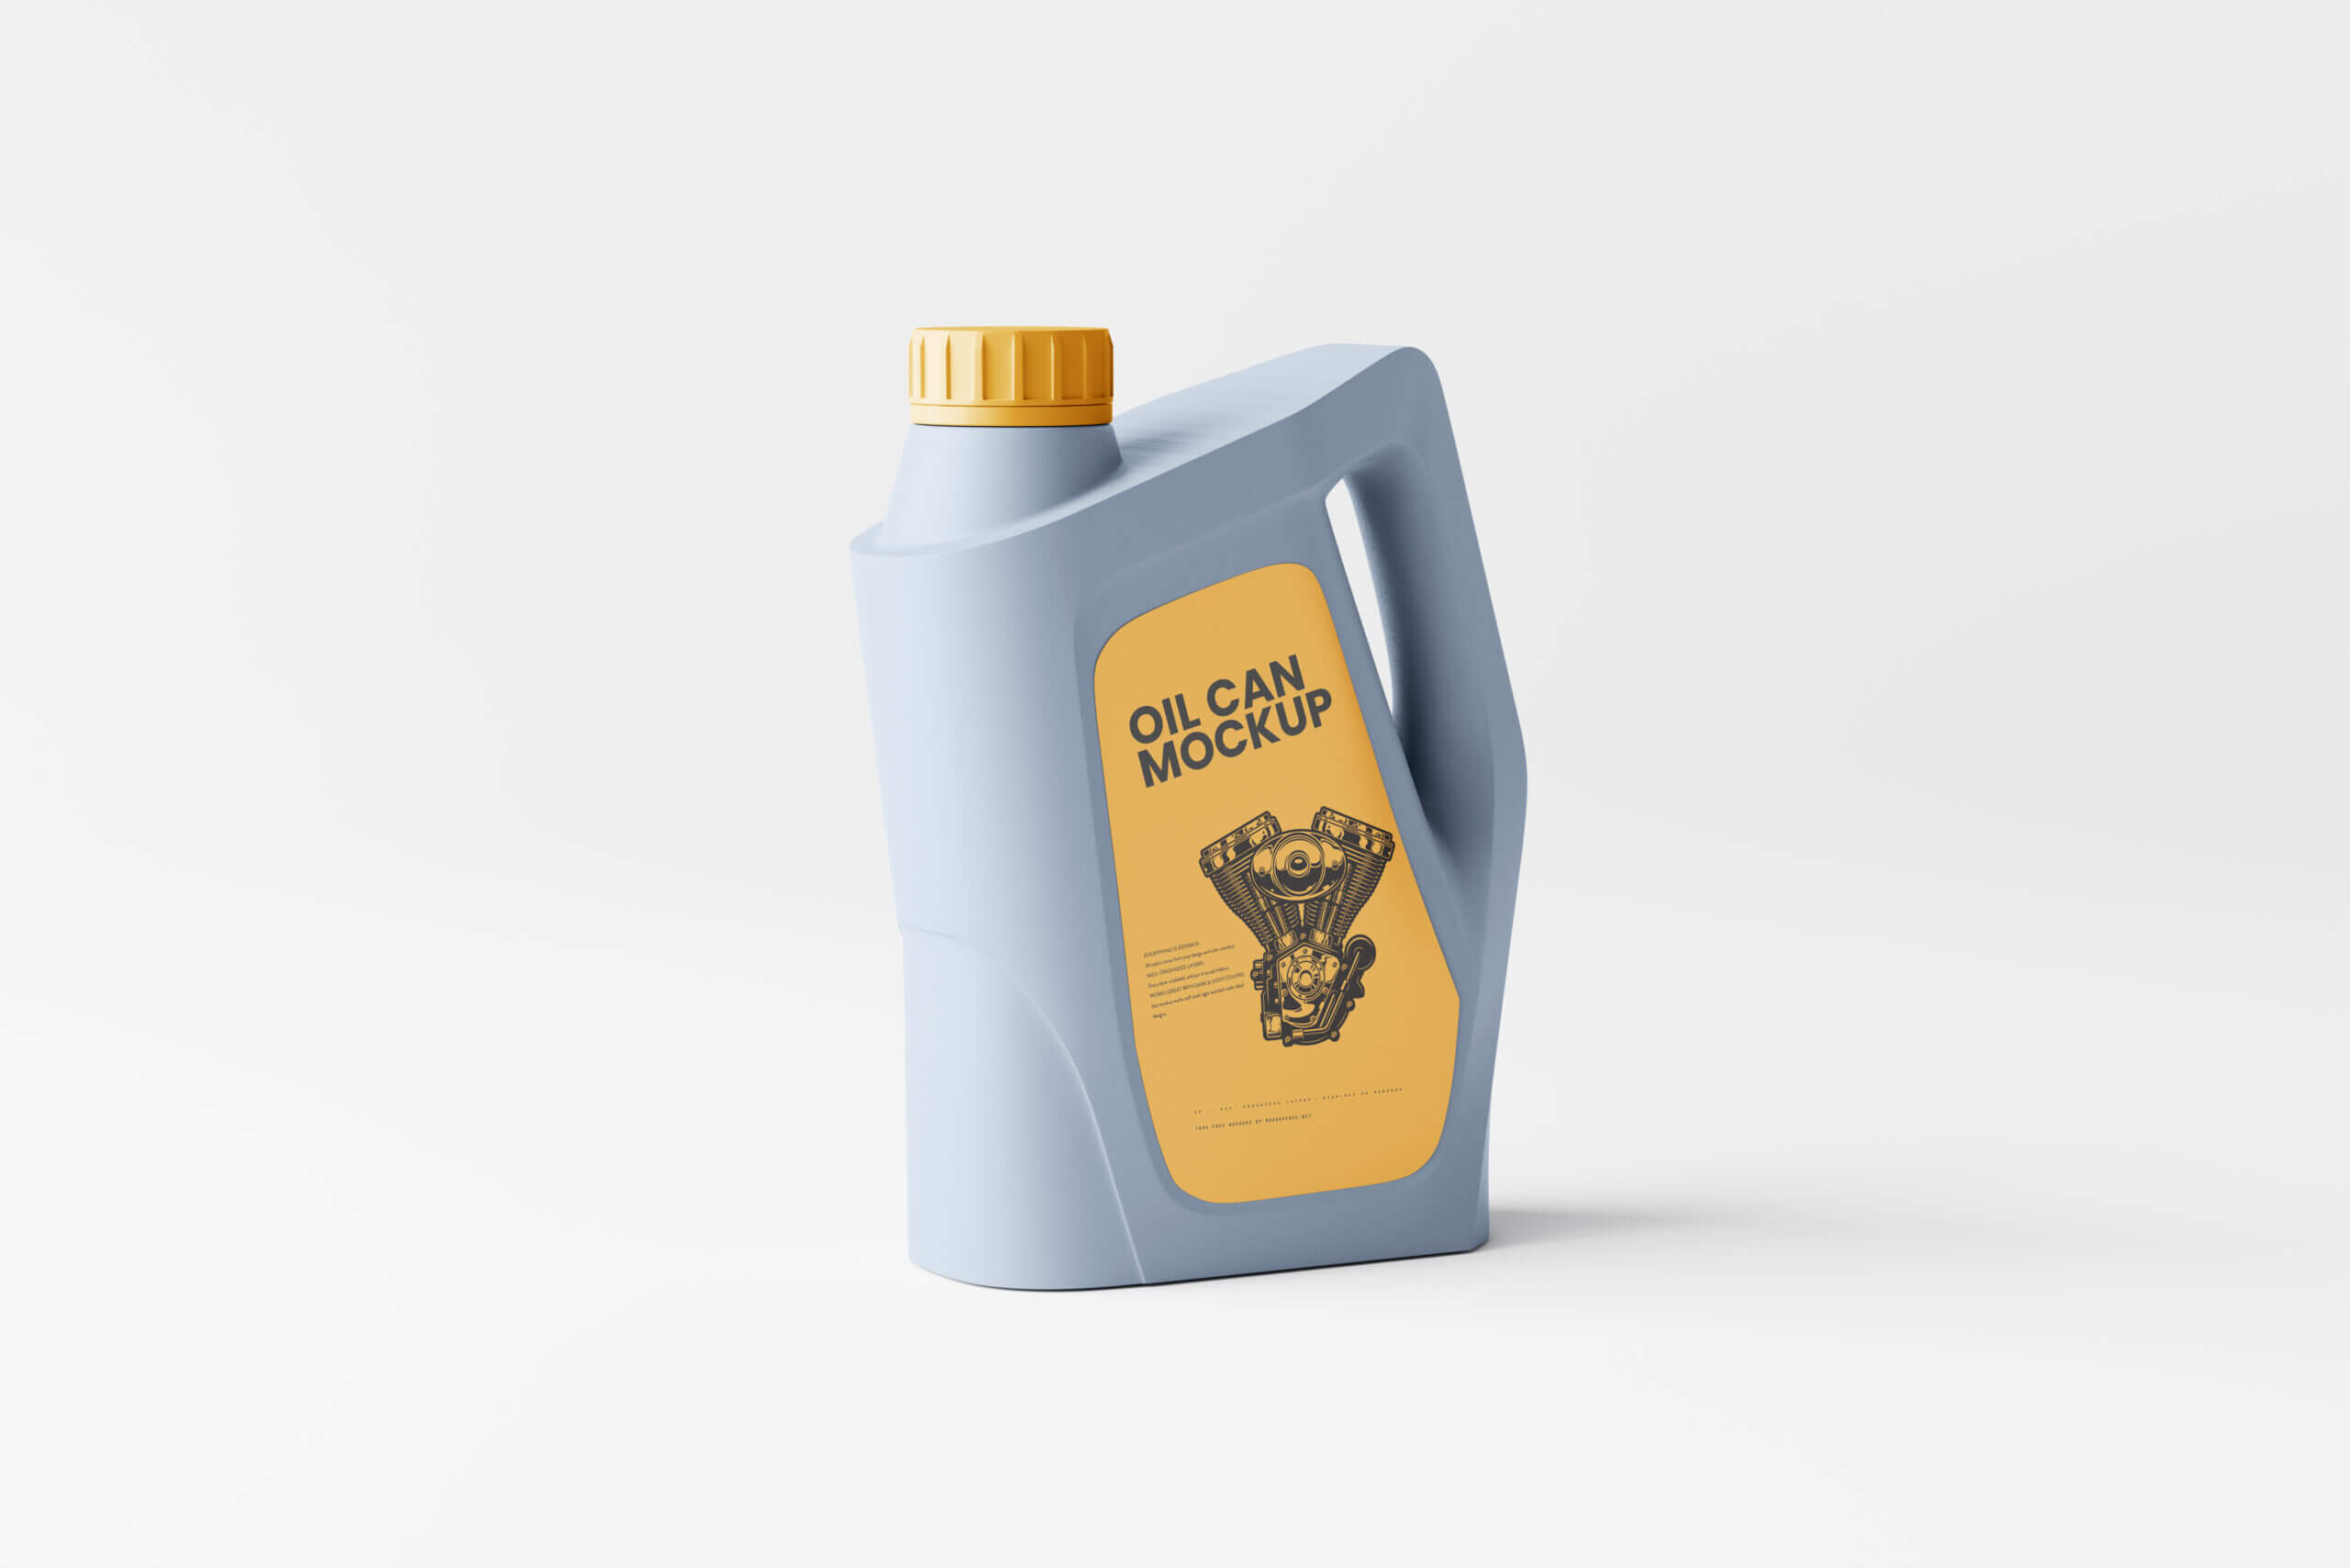 10 Free Engine Oil Can Mockup PSD Files2